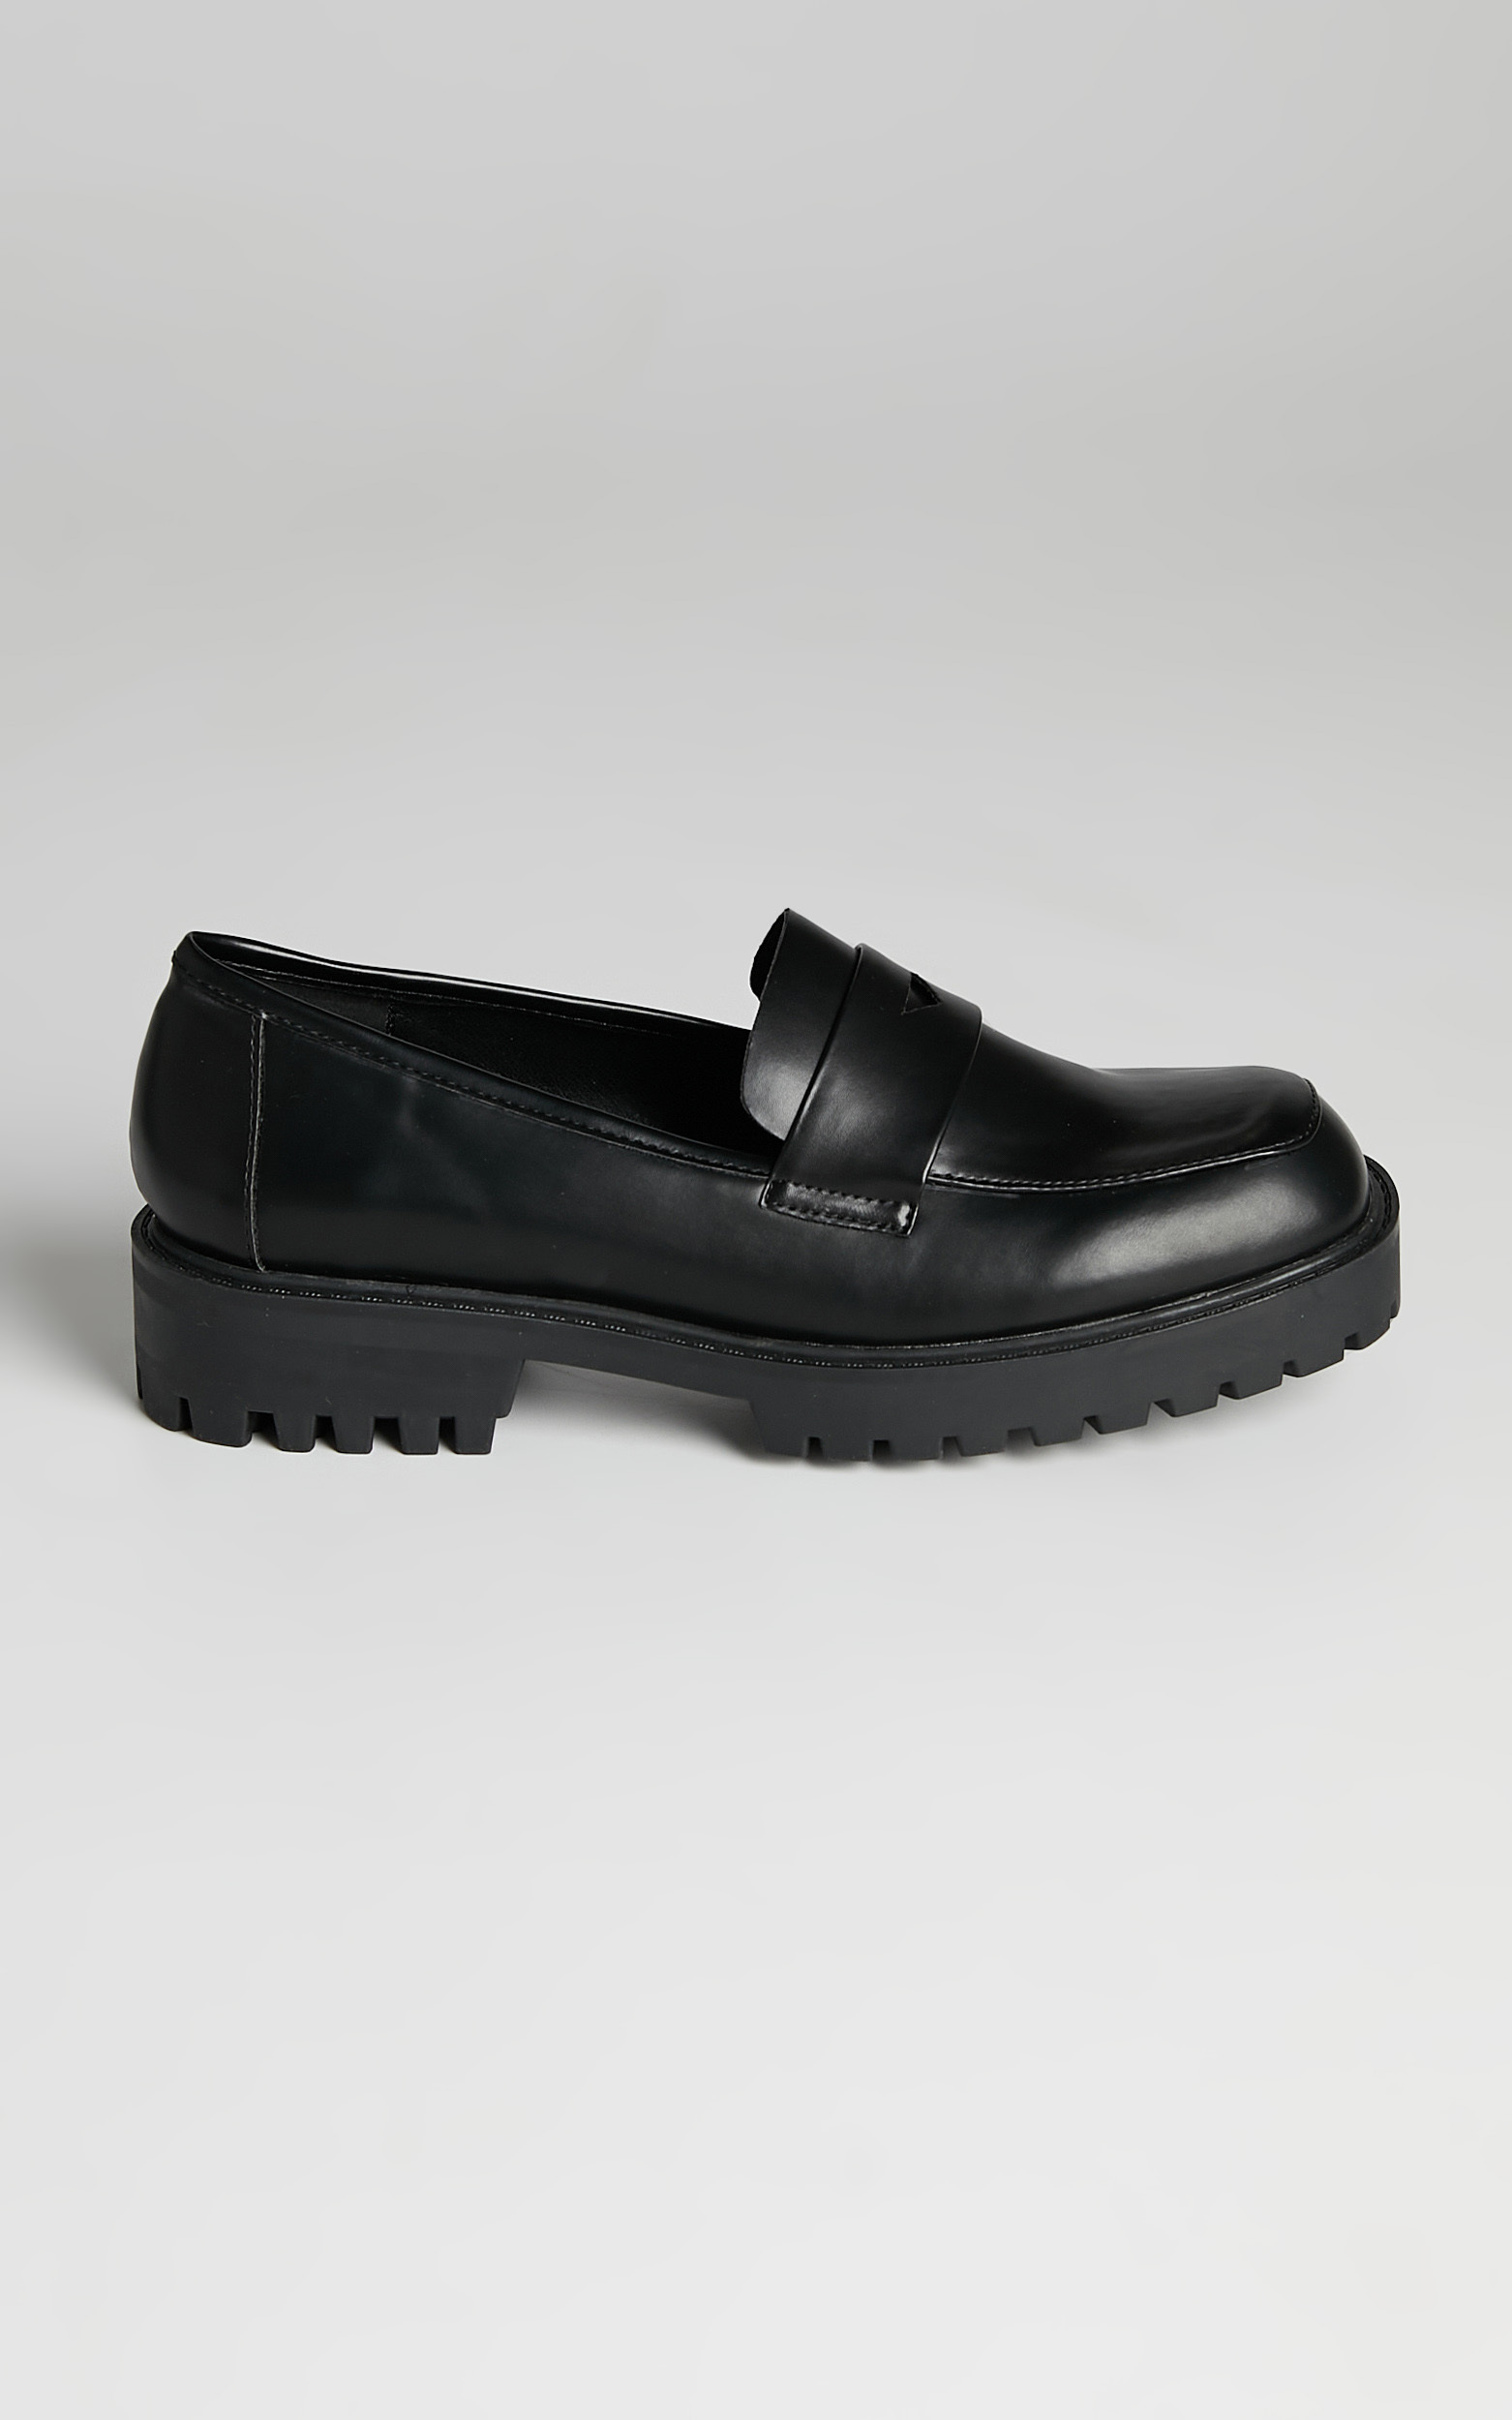 Therapy - Royce Loafer in Black Smooth - 05, BLK2, hi-res image number null